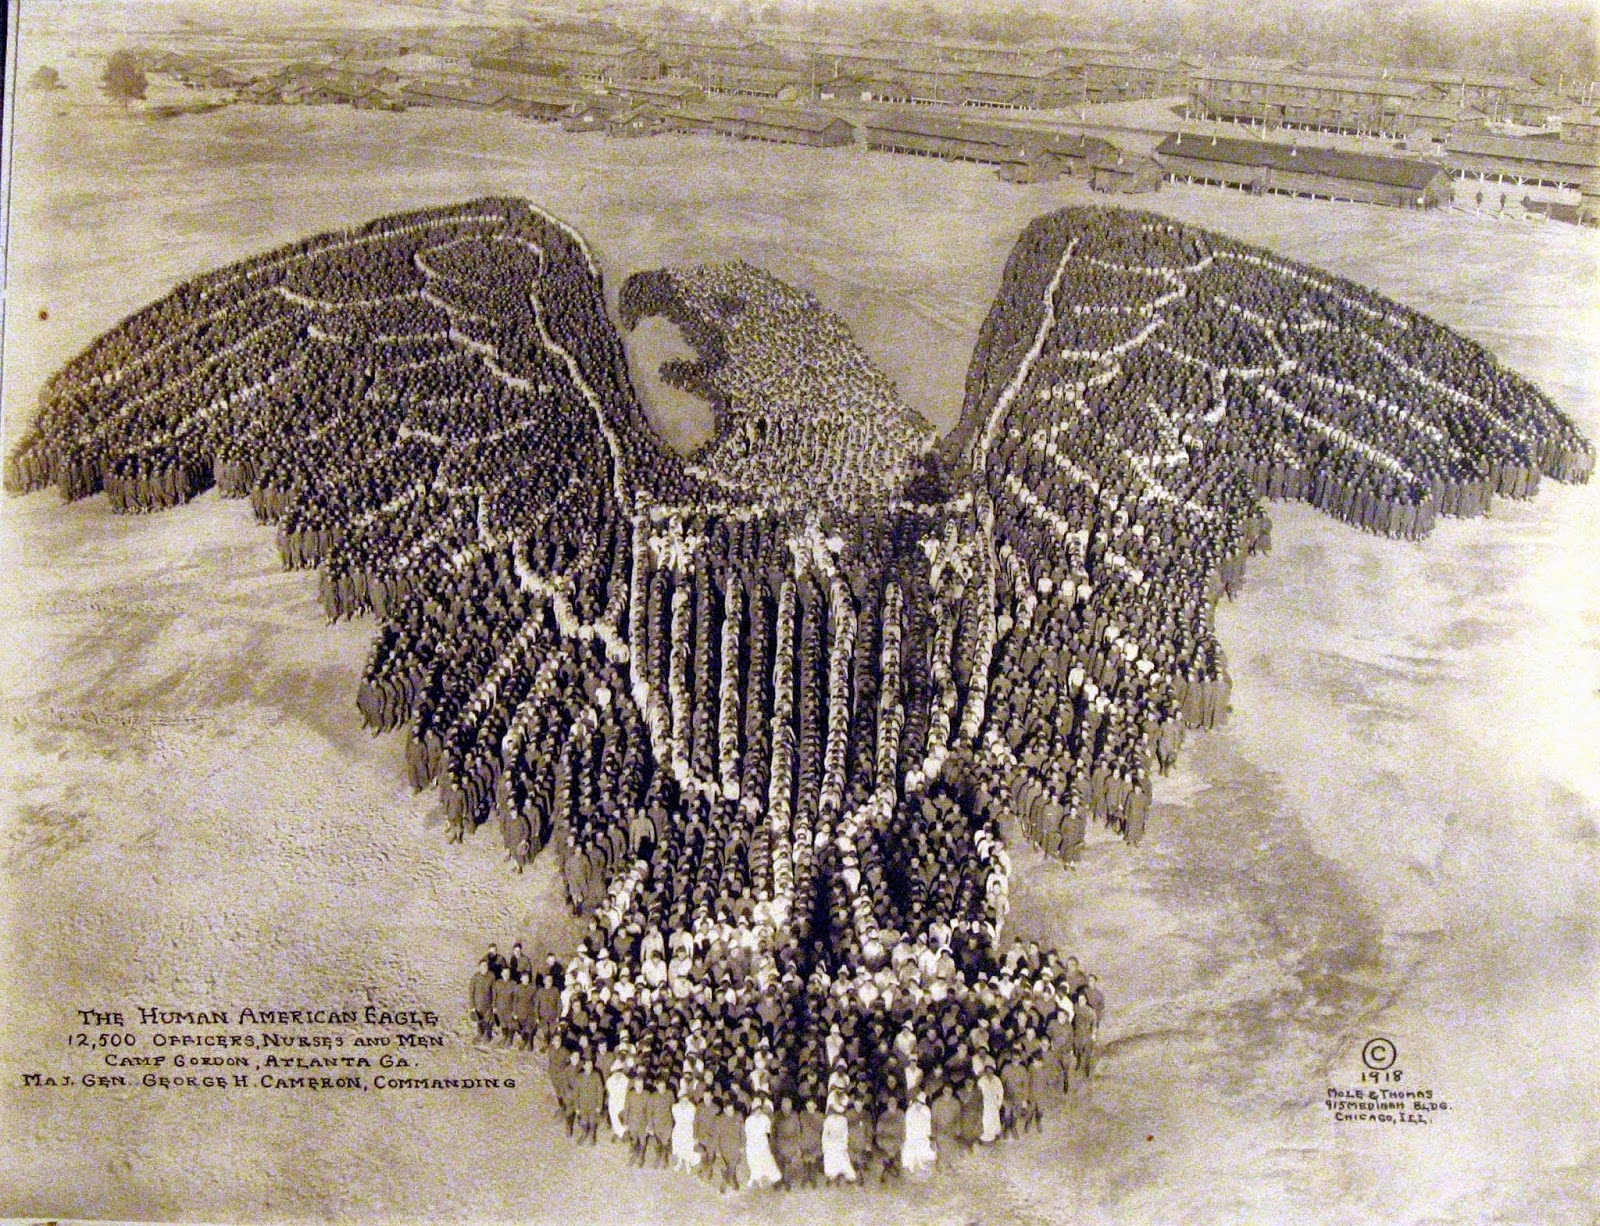 Pictures Formed by Thousands of US Soldiers during World War I (3).jpg